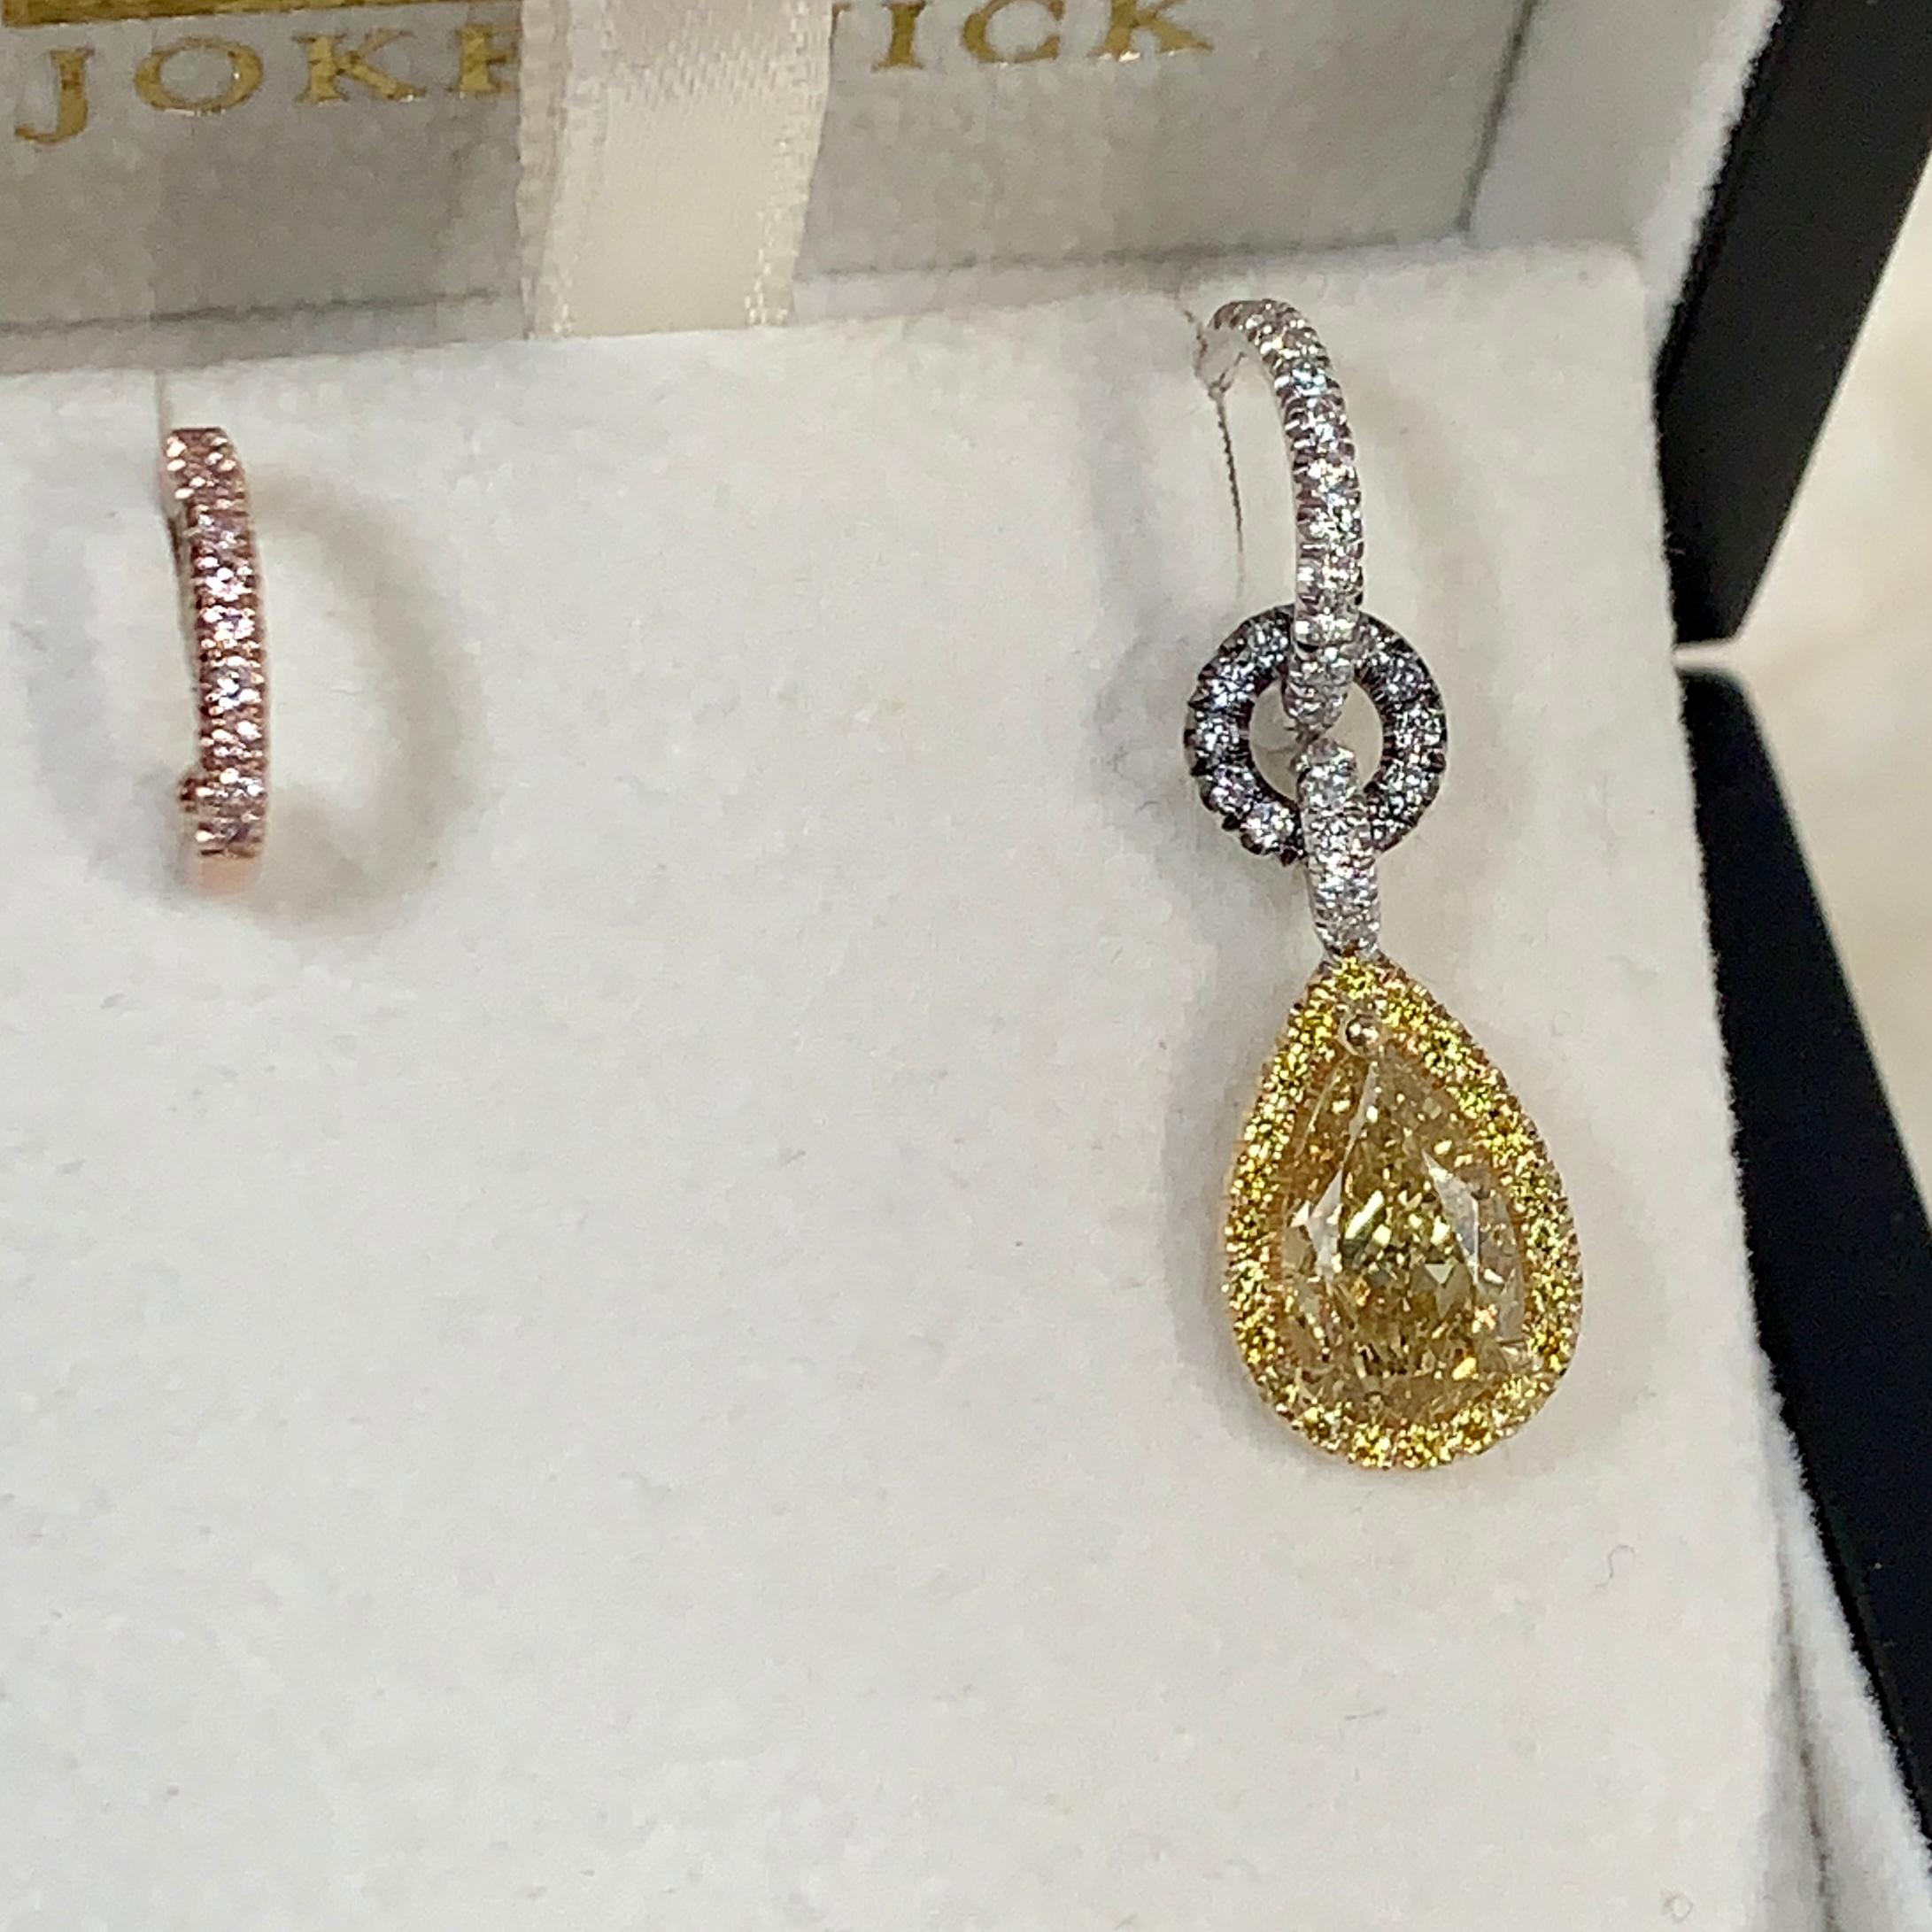 Mismatched Hoop earrings with removable charm handmade in Belgium by jewelry artist Joke Quick, in solid 18K Yellow, Rose & White gold and handmade the traditional way ( no casting or printing involved ).
One of the two hoop earrings is made in